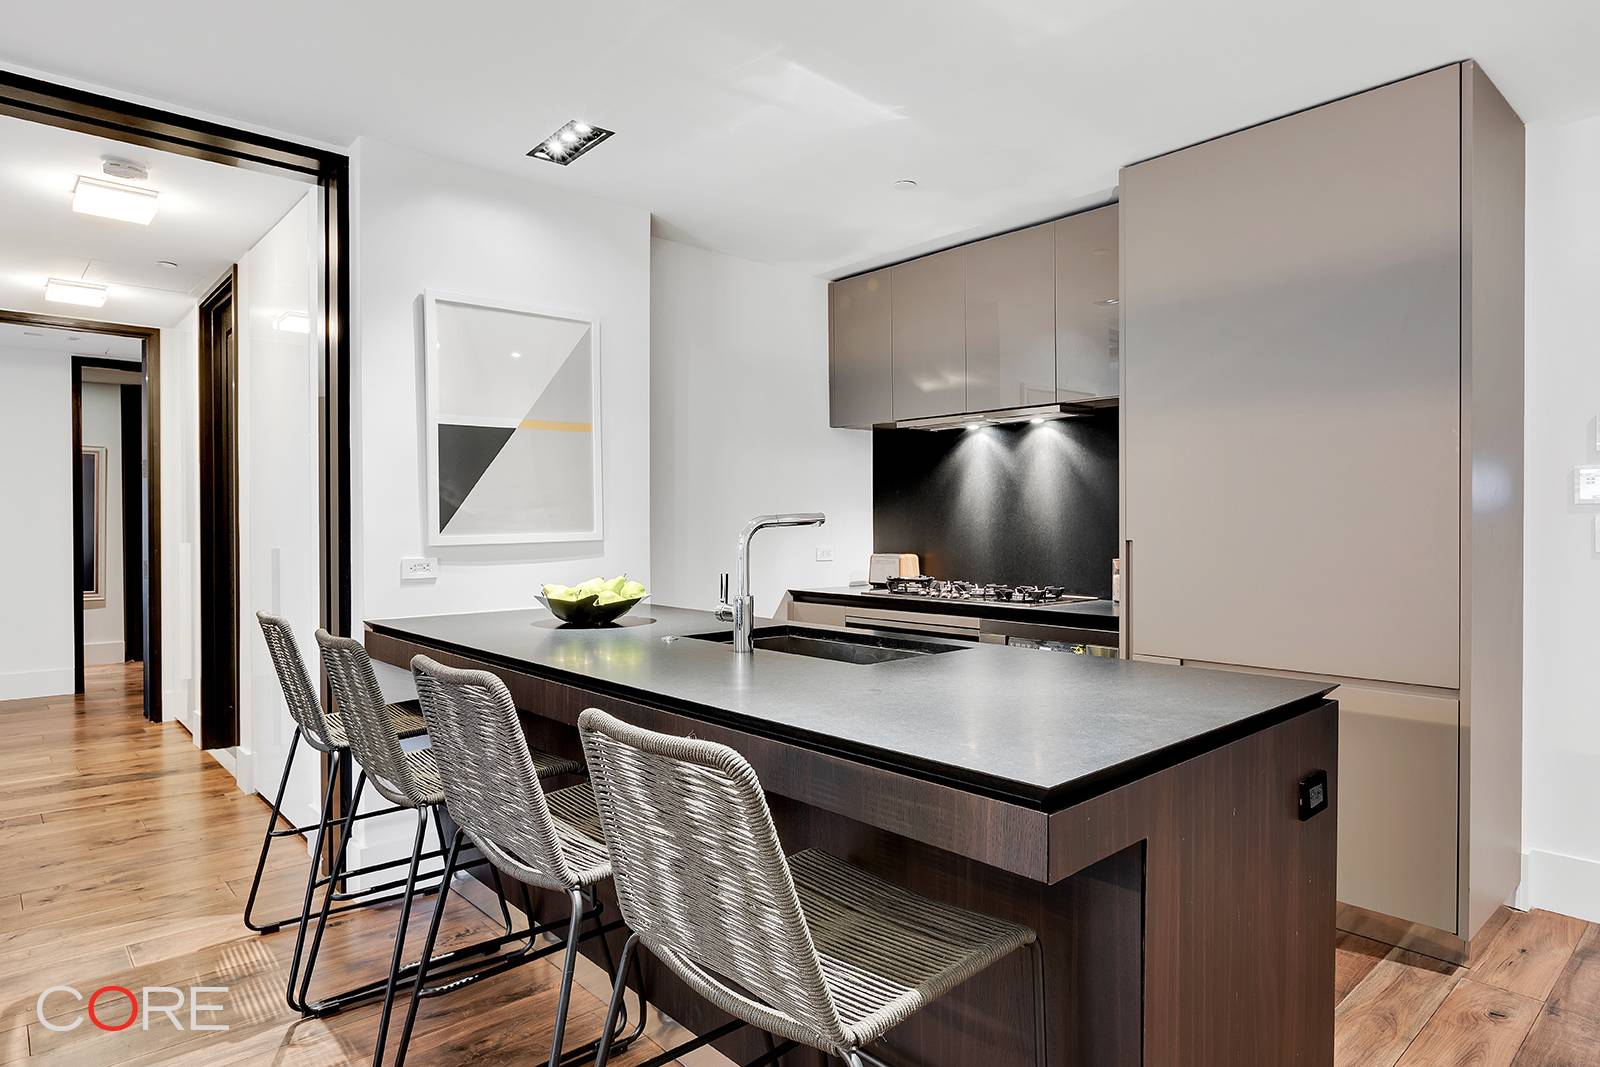 Unit 702 is a highly coveted, south facing, two bedroom residence that boasts oversized modern French doors and overlooks Chelsea s famous landmark carriage houses.